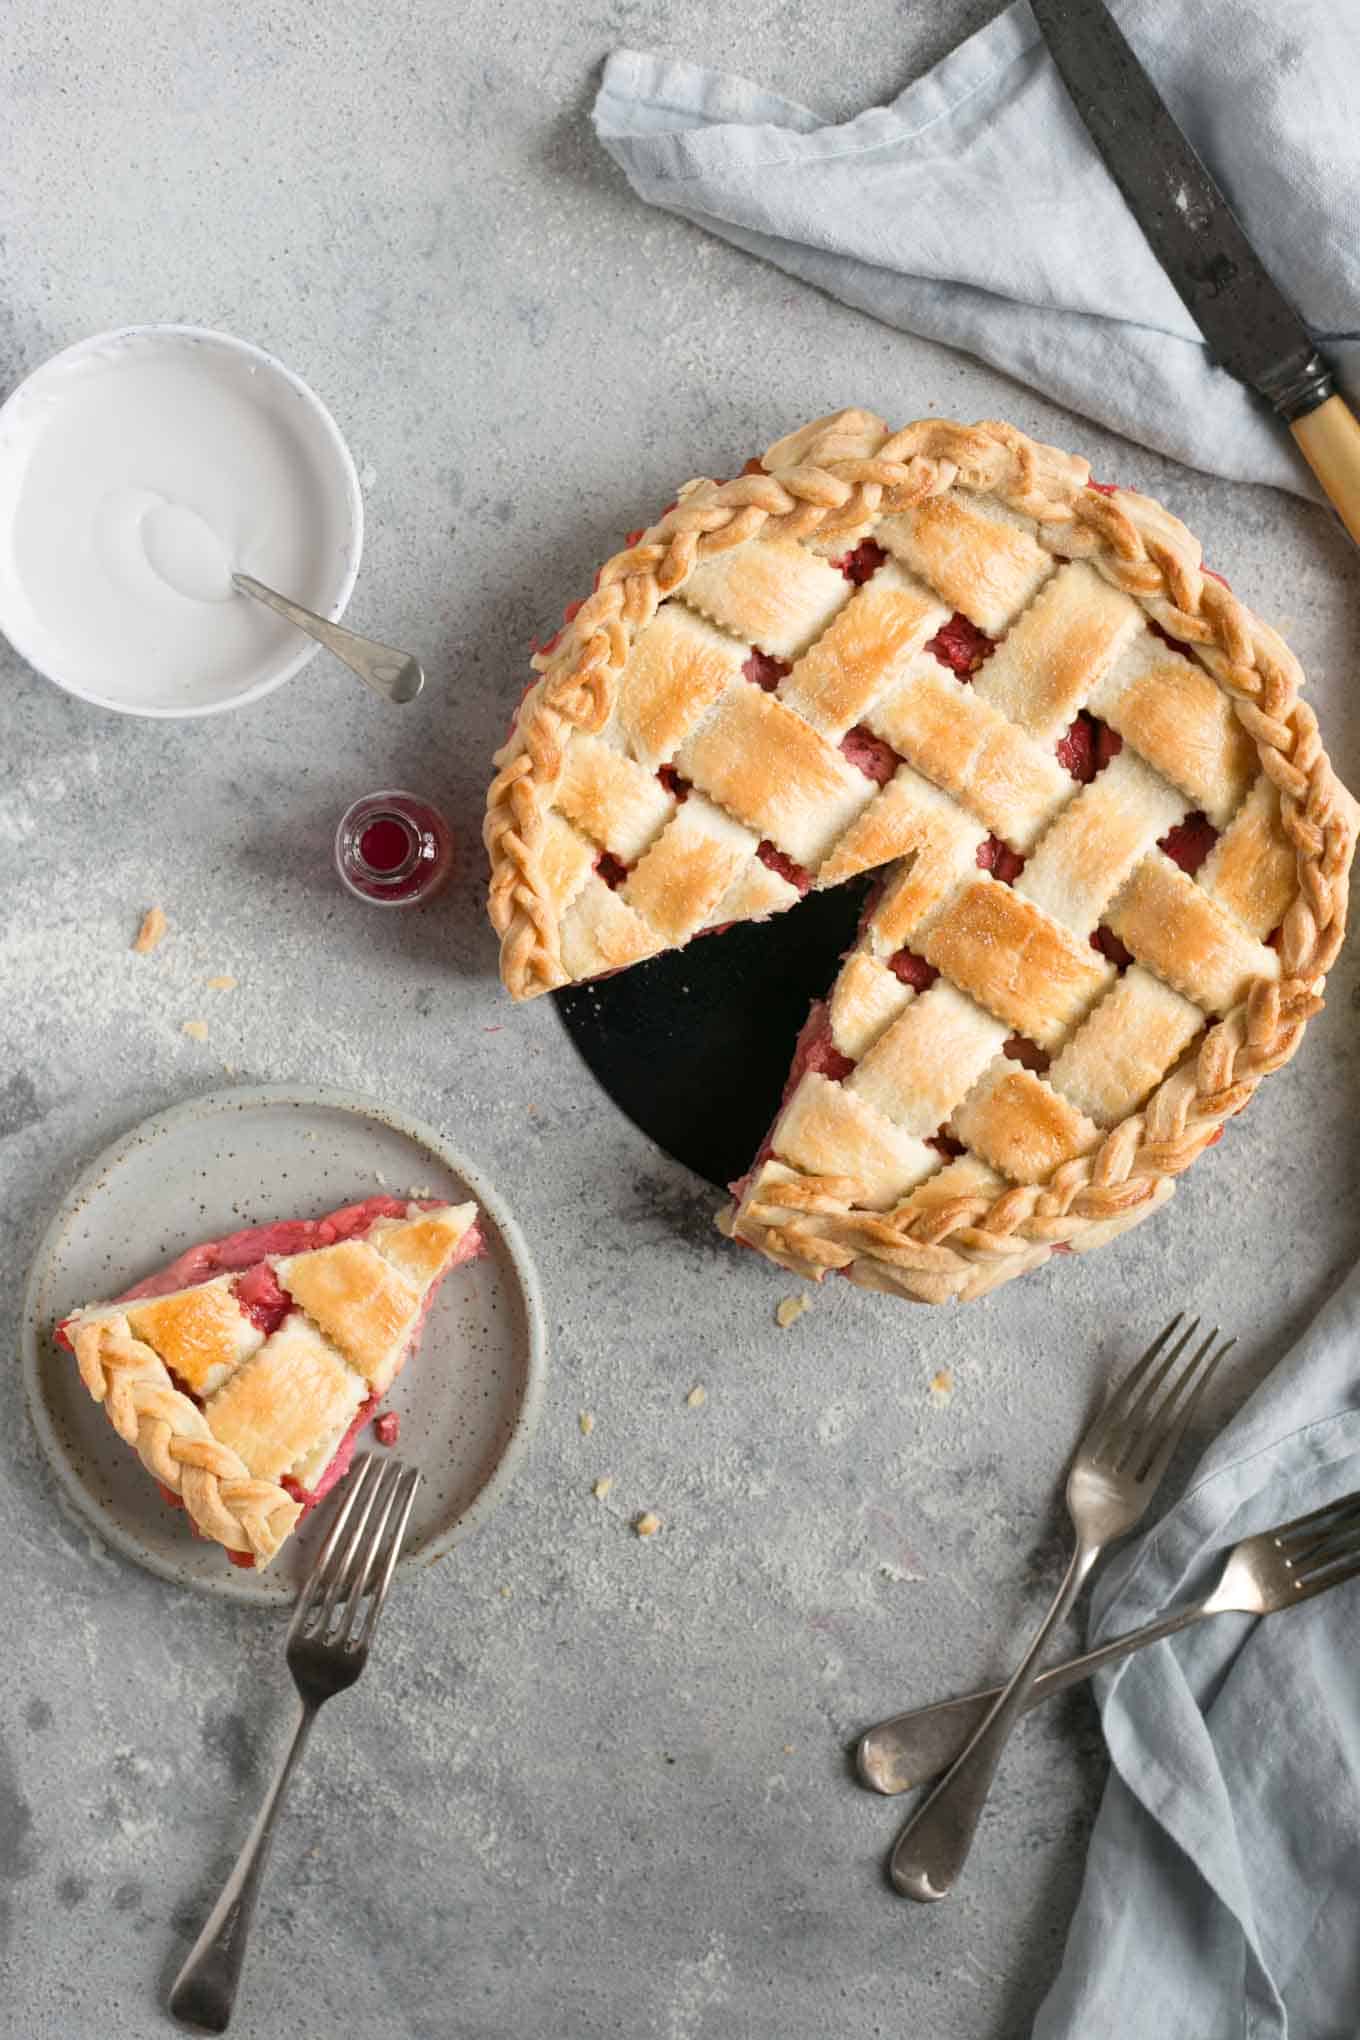 Rhubarb strawberry pie with lattice top. Delicious pie, full of classic flavours! #dairyfree #vegetarian #rhubarb #pie | via @annabanana.co